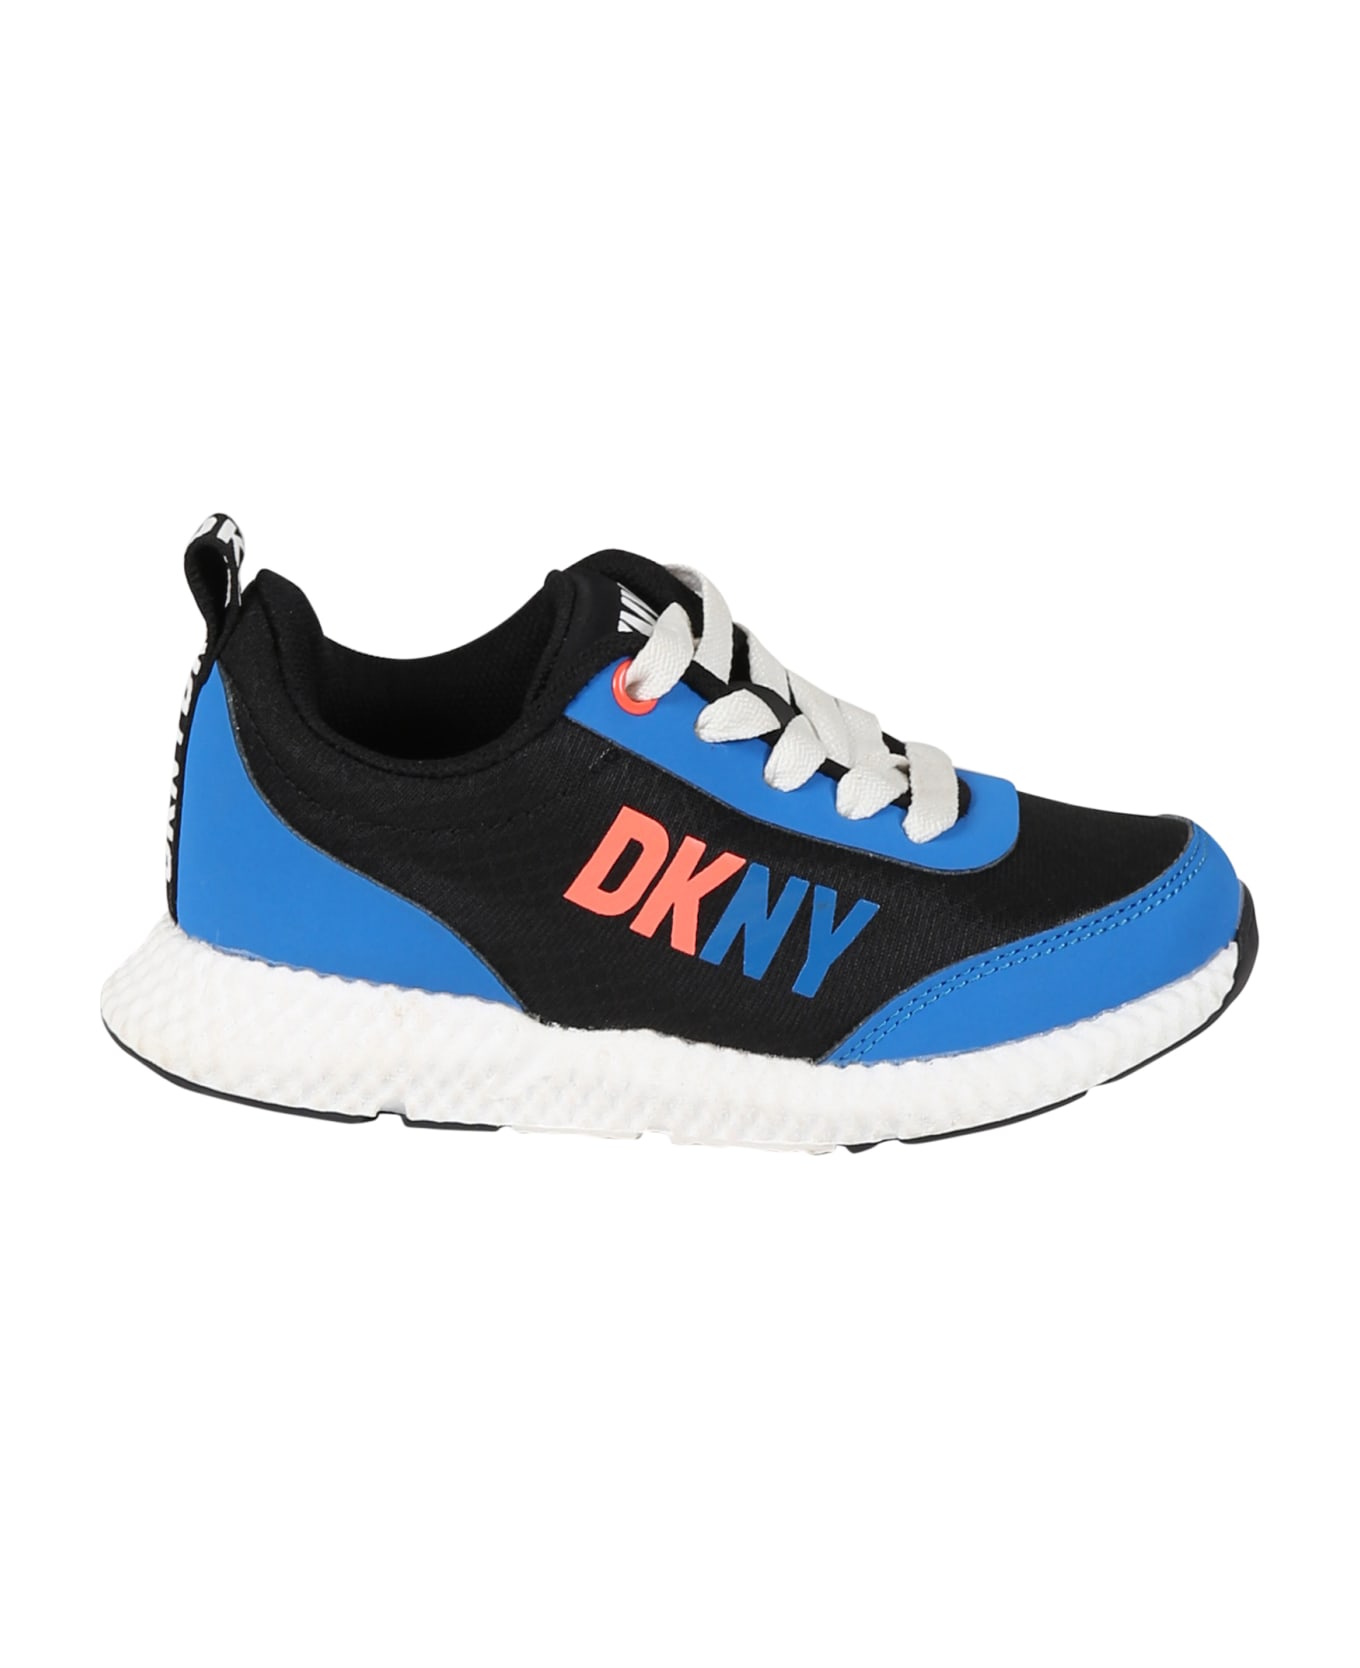 DKNY Multicolor Sneakers For Kids With Logo - Multicolor